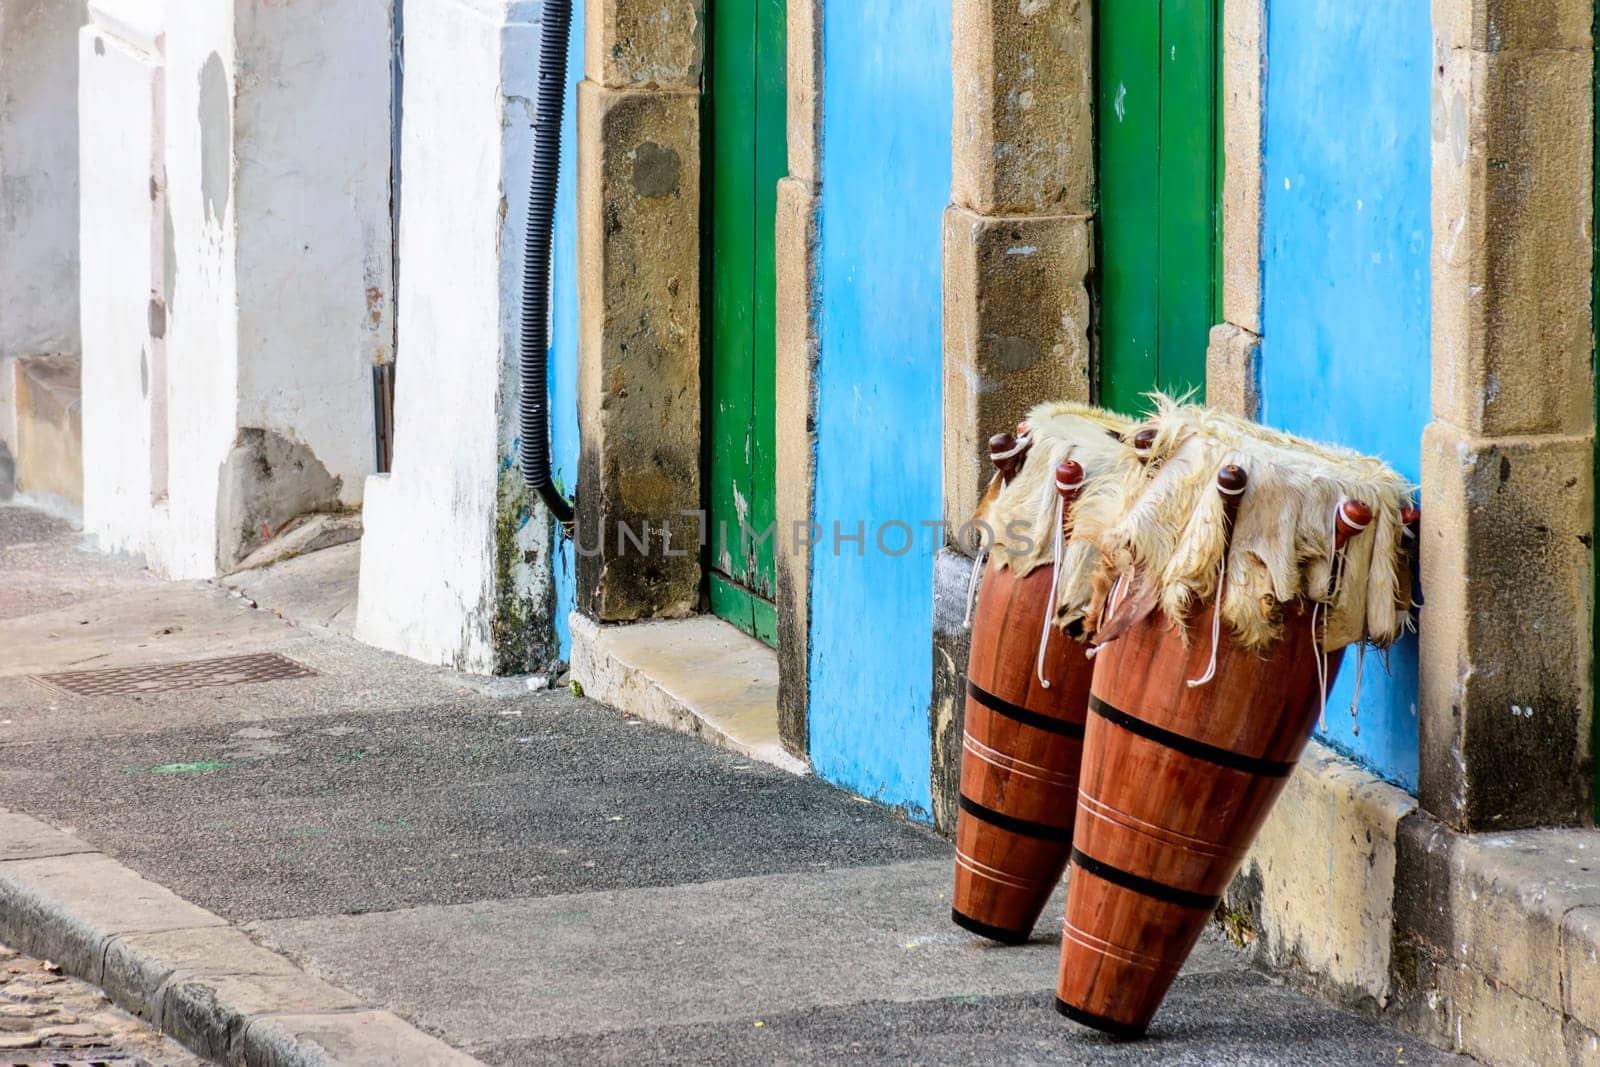 Ethnic drums also called atabaques on the streets of Pelourinho, the historic center of the city of Salvador in Bahia